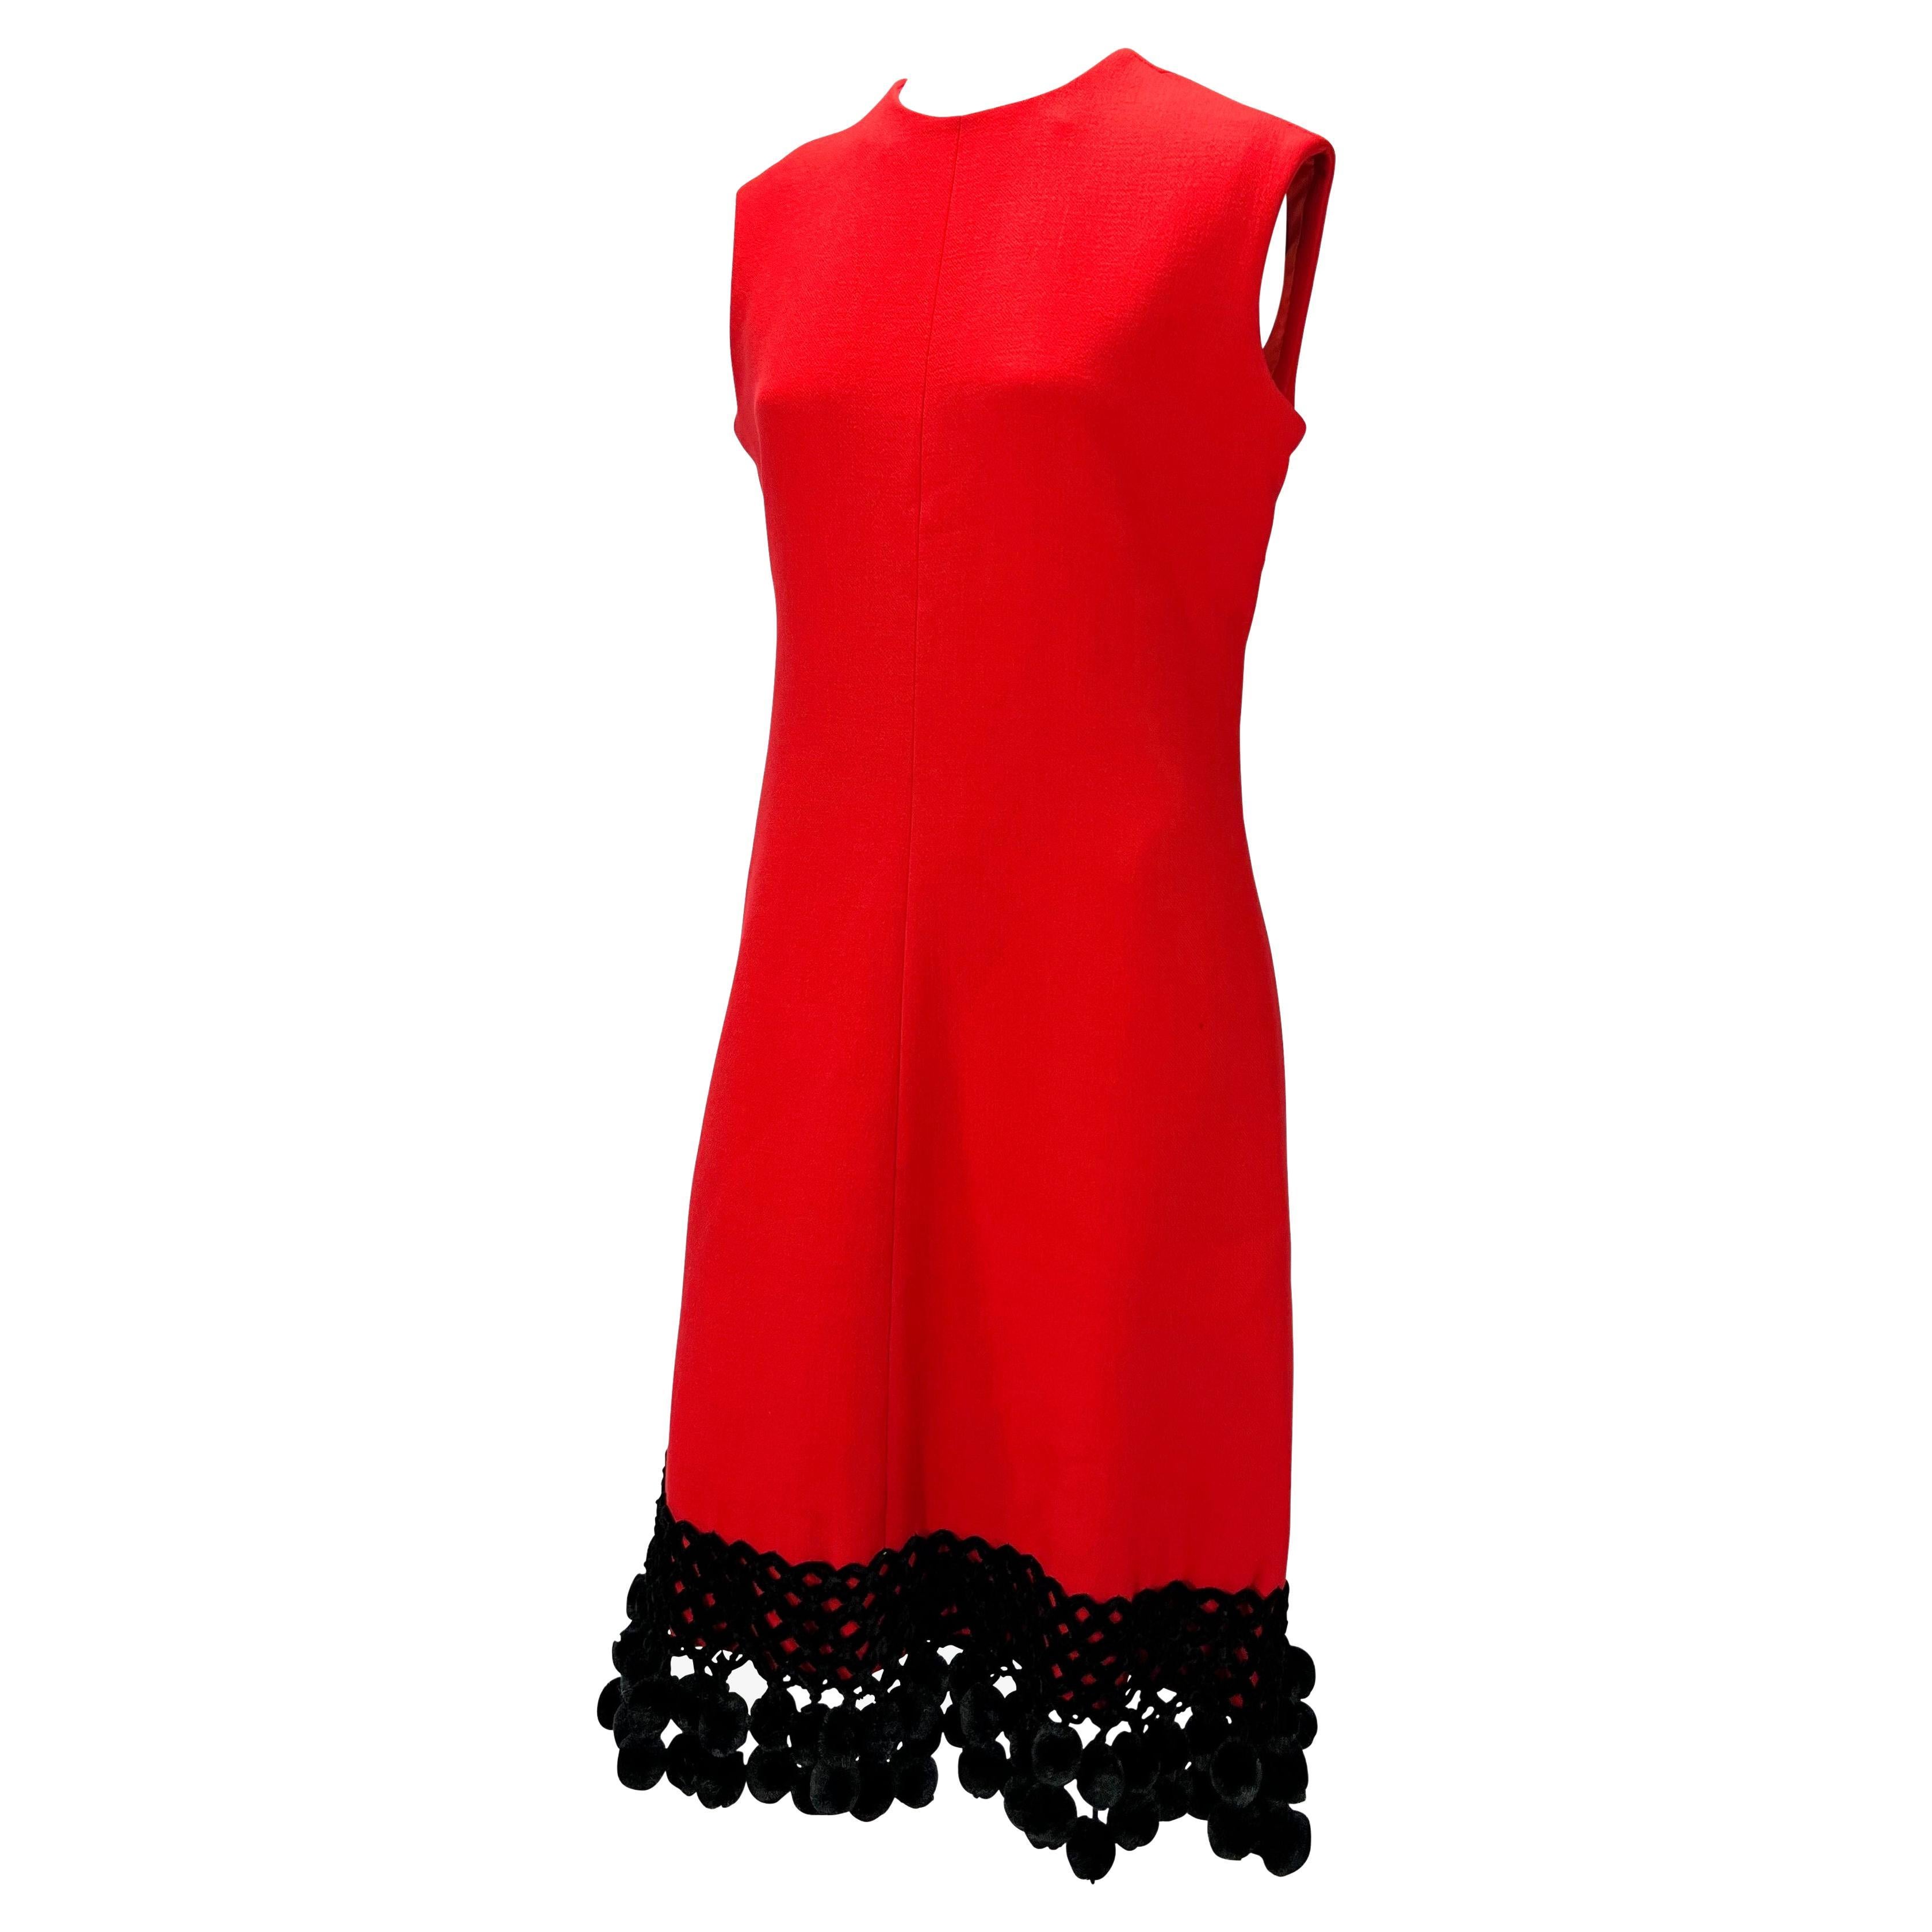 Presenting a stunning red and black Valentino Garavani dress. From the 1970s, this vibrant red wool sleeveless dress features a crew neckline and is made complete with a black pom-pom detail at the hem. Perfectly modern, this vintage dress is the